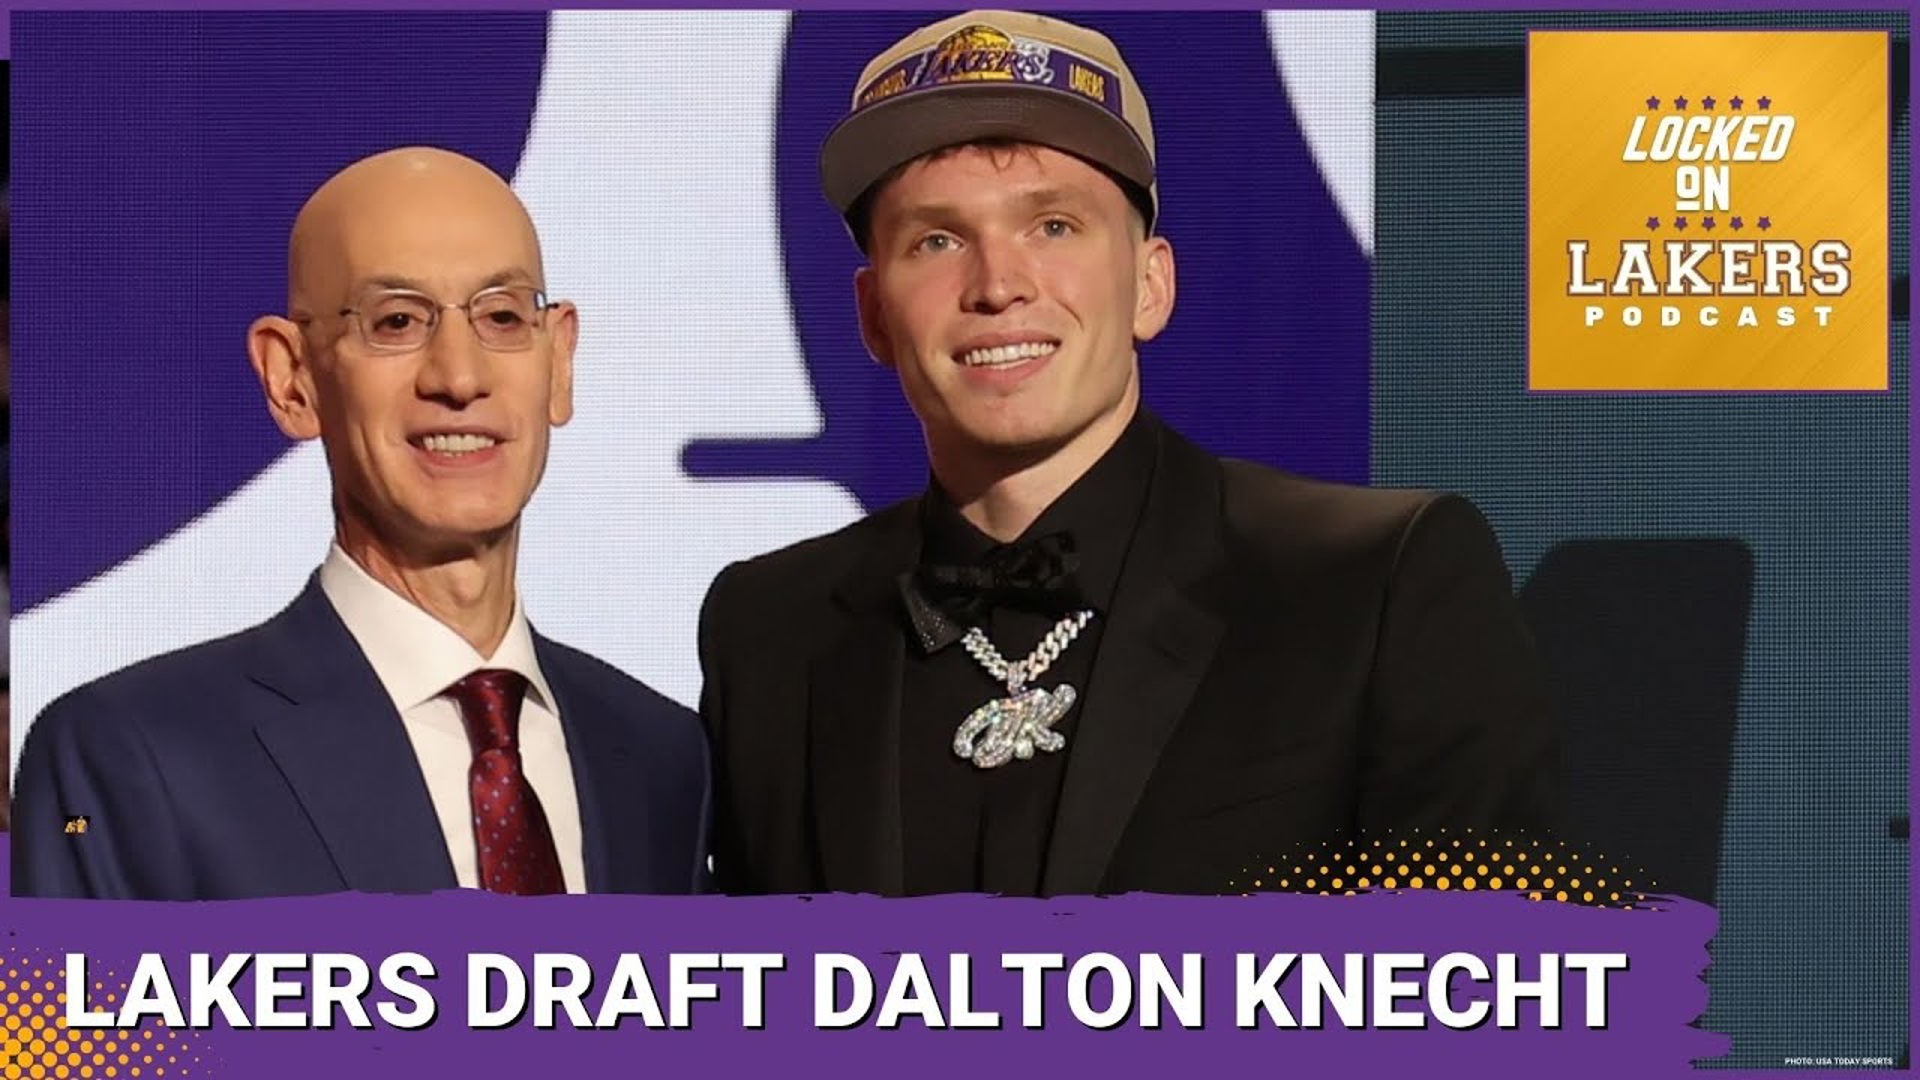 Last season, the Lakers had opportunities to draft players in the first round that were projected to help an NBA team right away.